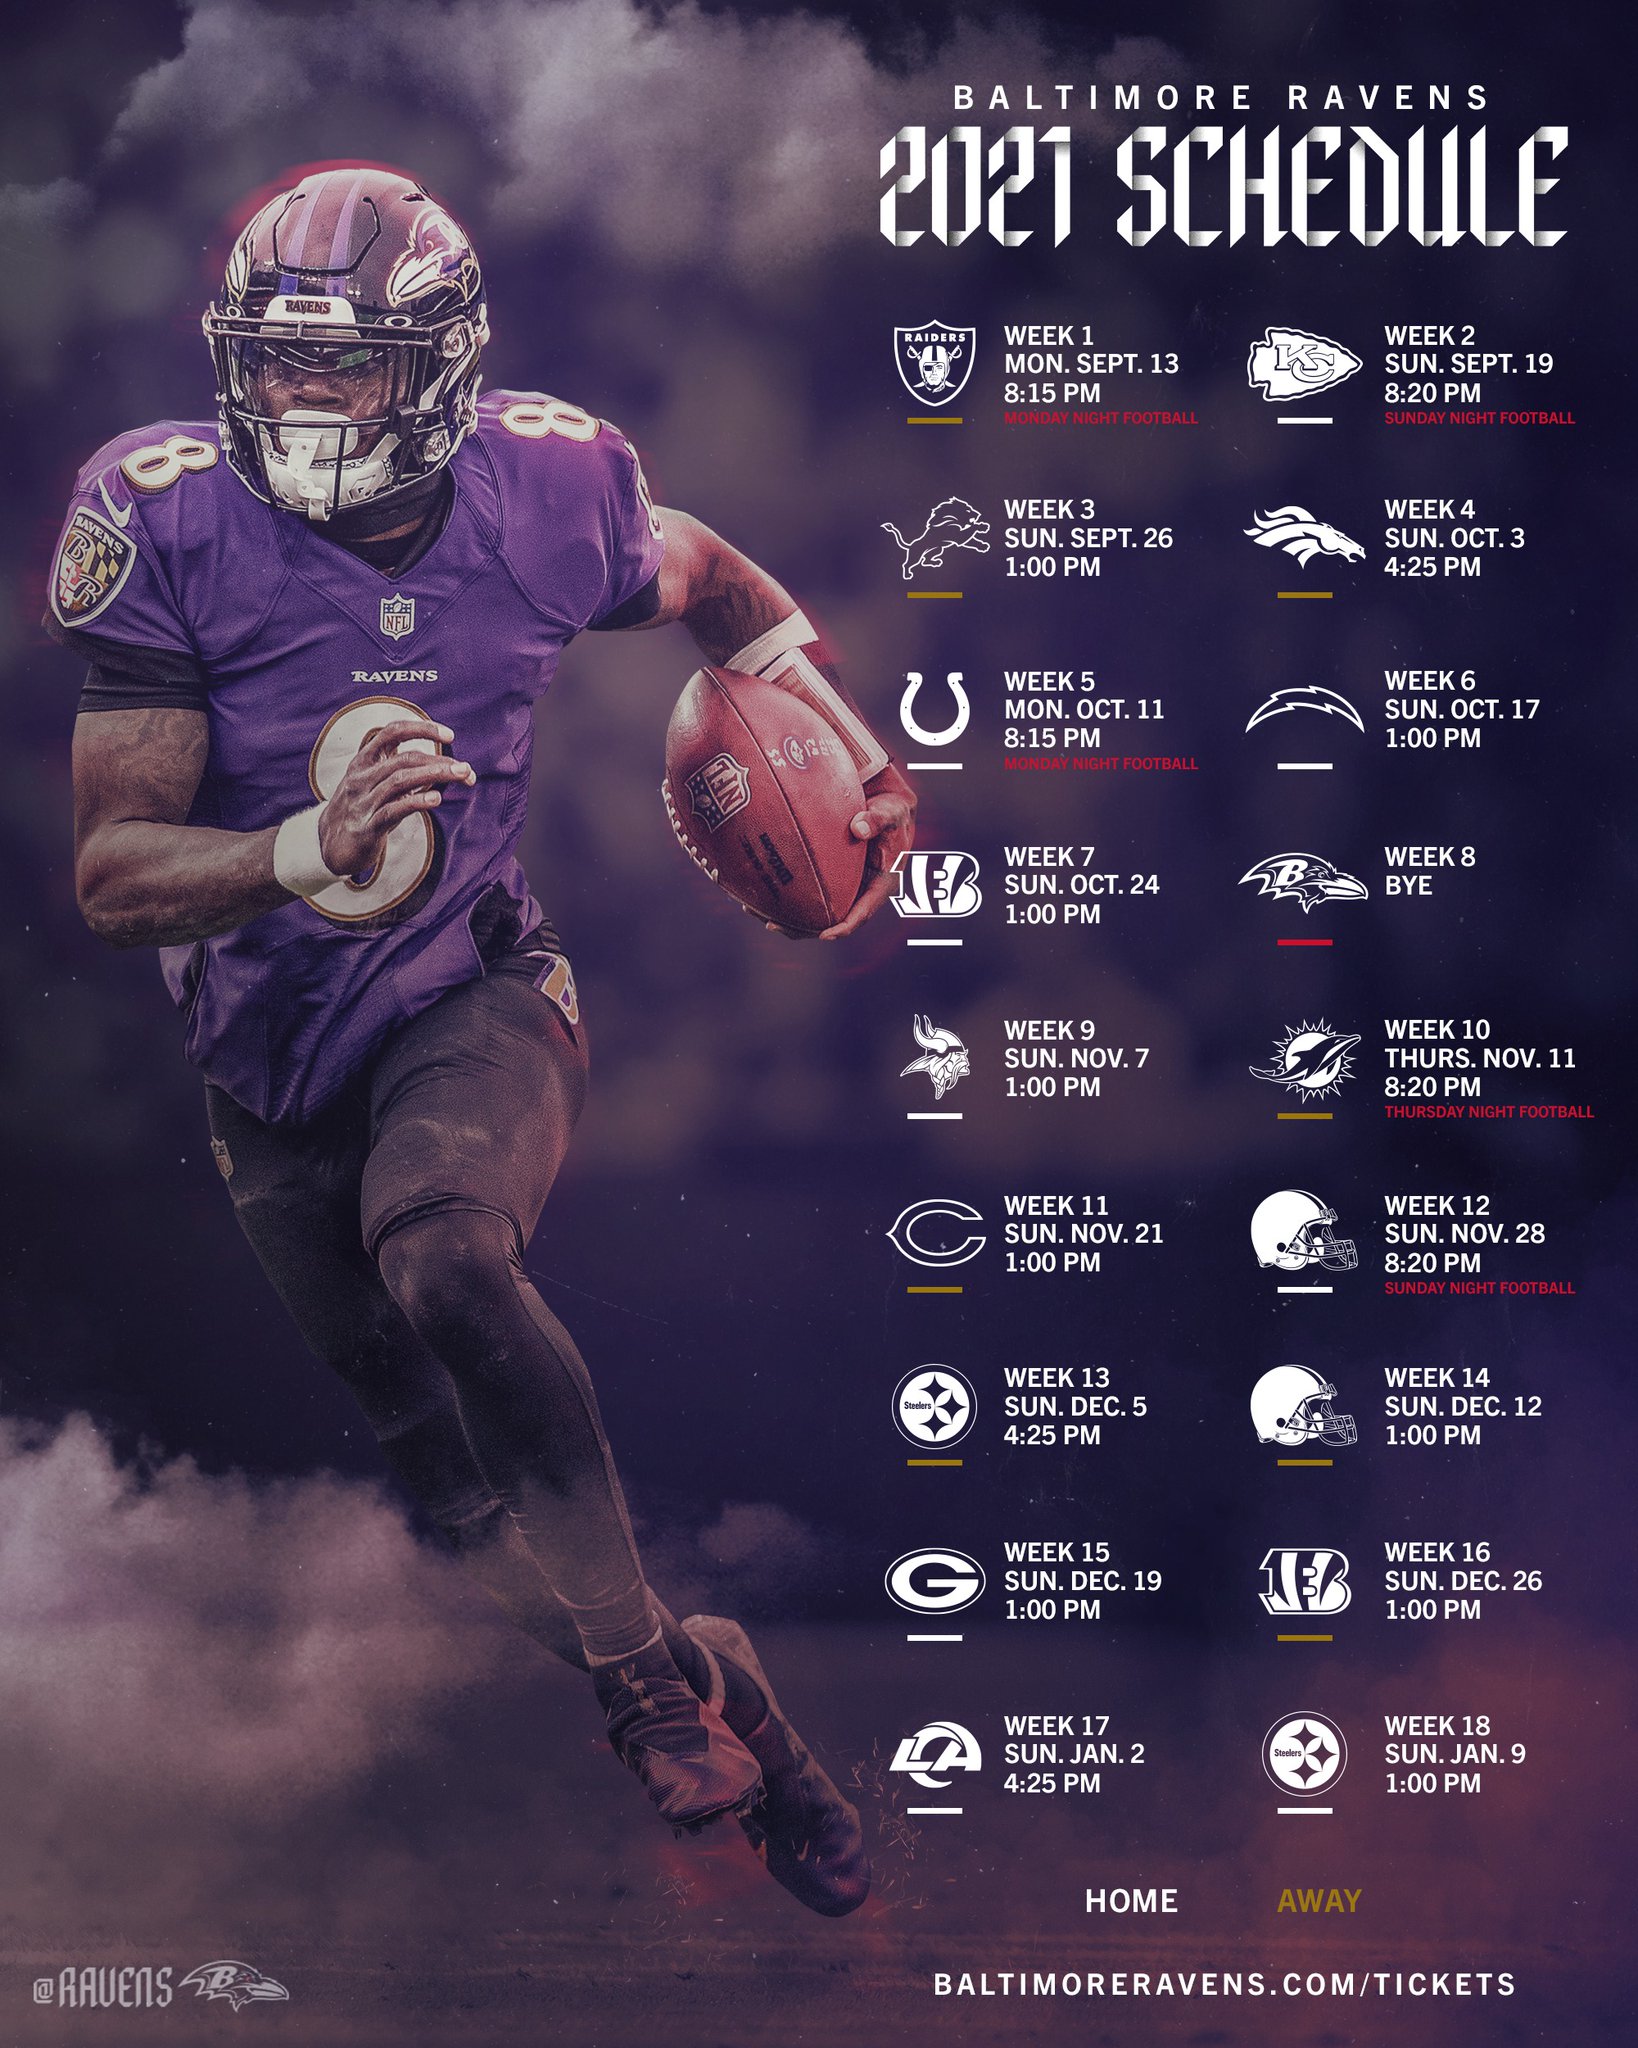 Baltimore Ravens on X: 'The 2021 Schedule❗️ Which game are you